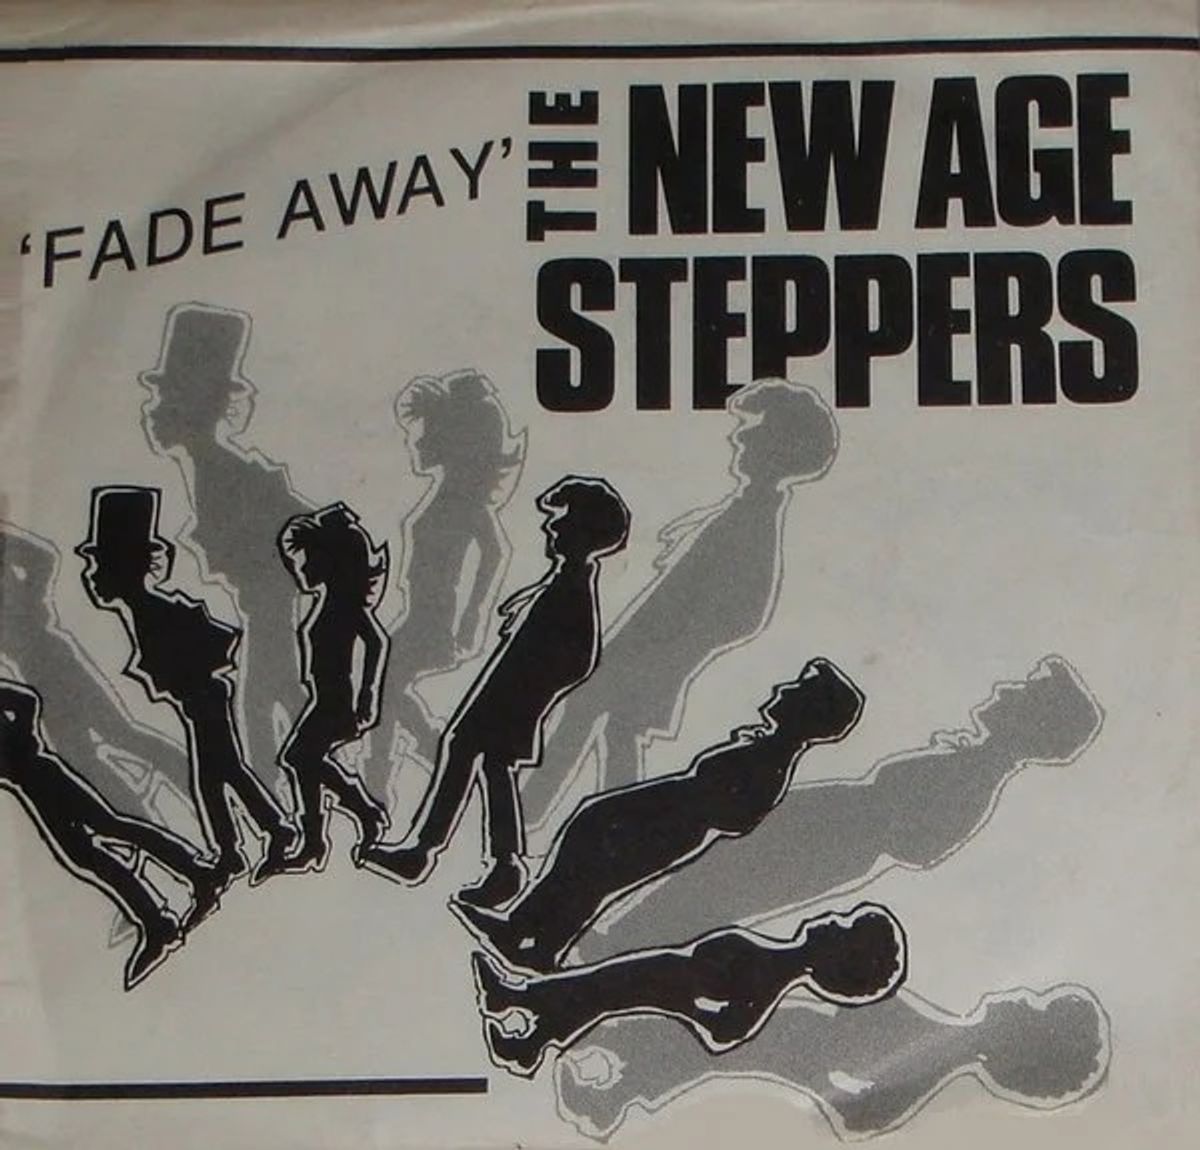 #ZomersGewoel - New Age Steppers - Fade Away (1980)